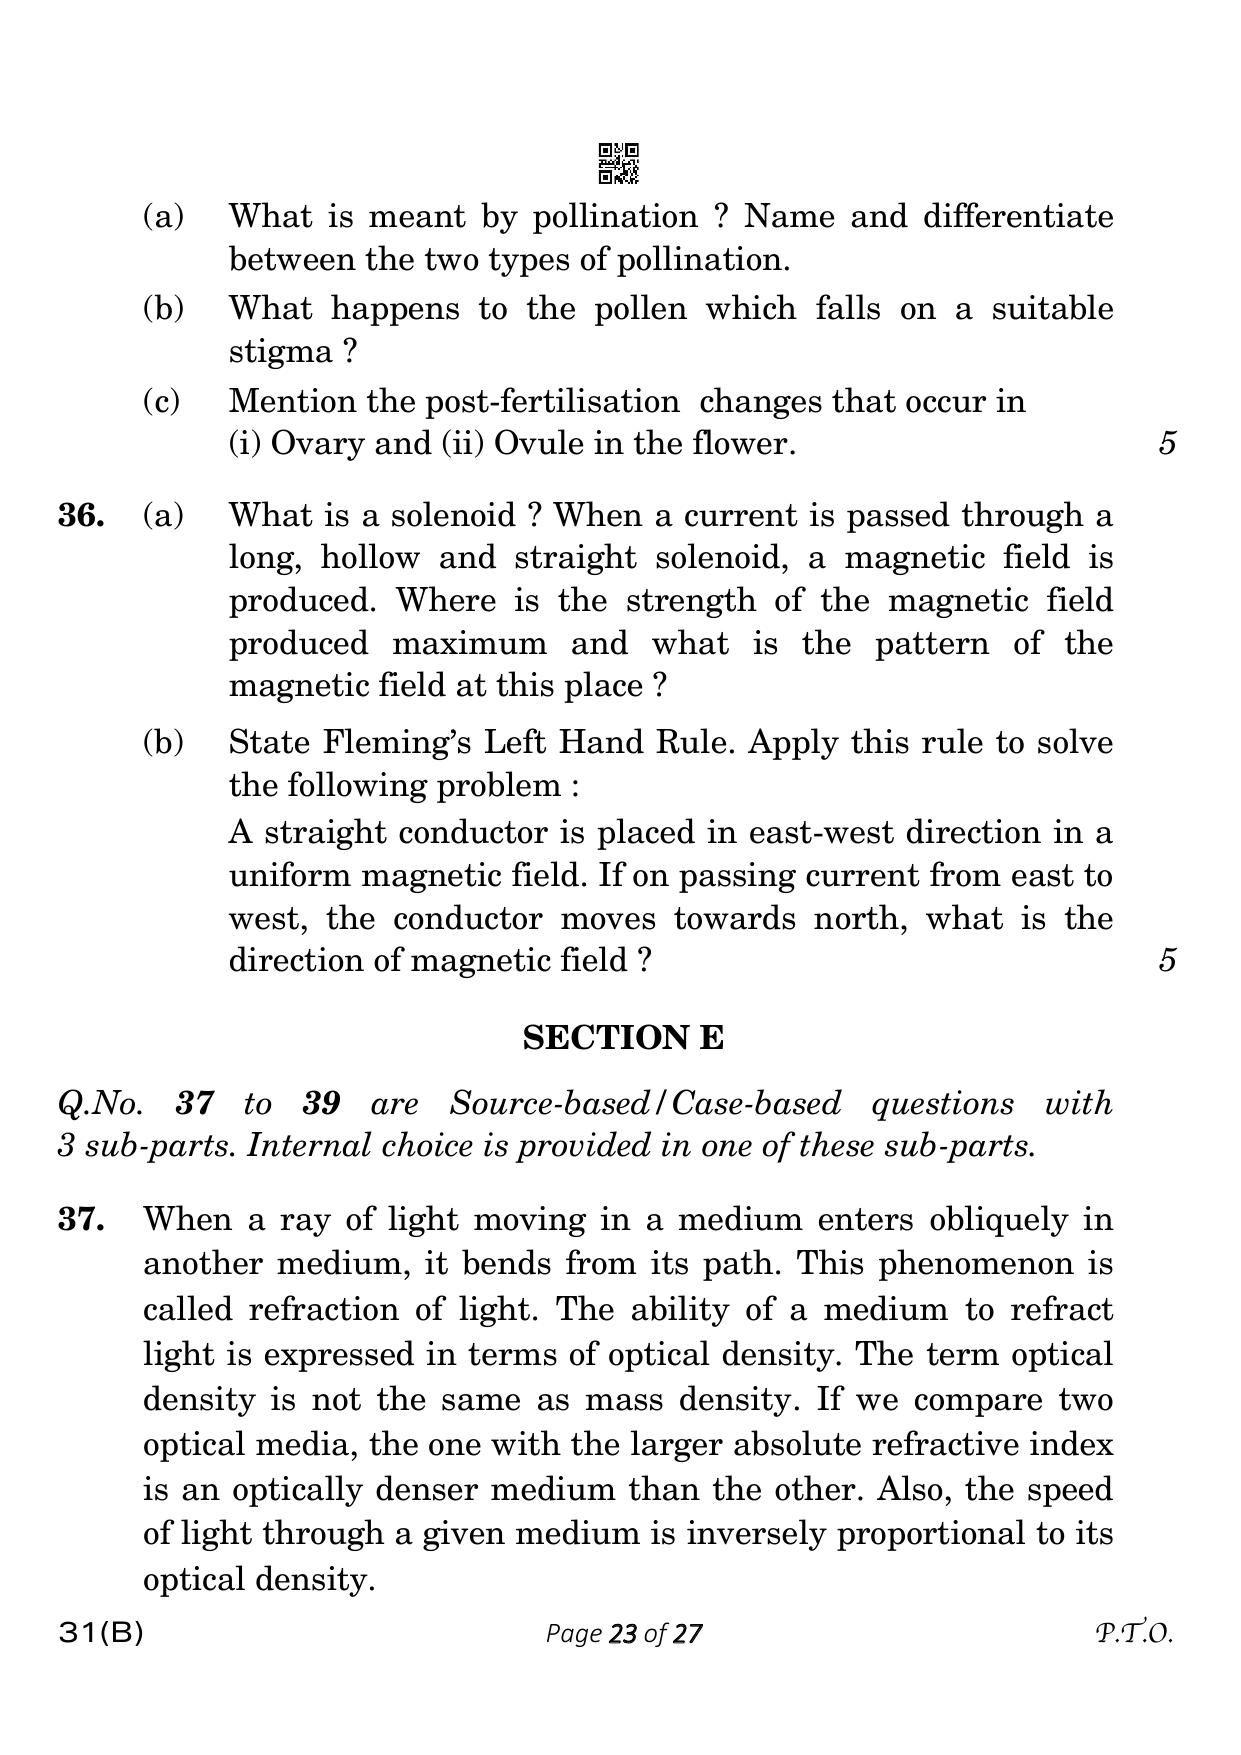 CBSE Class 10 31-B Science 2023 (Compartment) Question Paper - Page 23